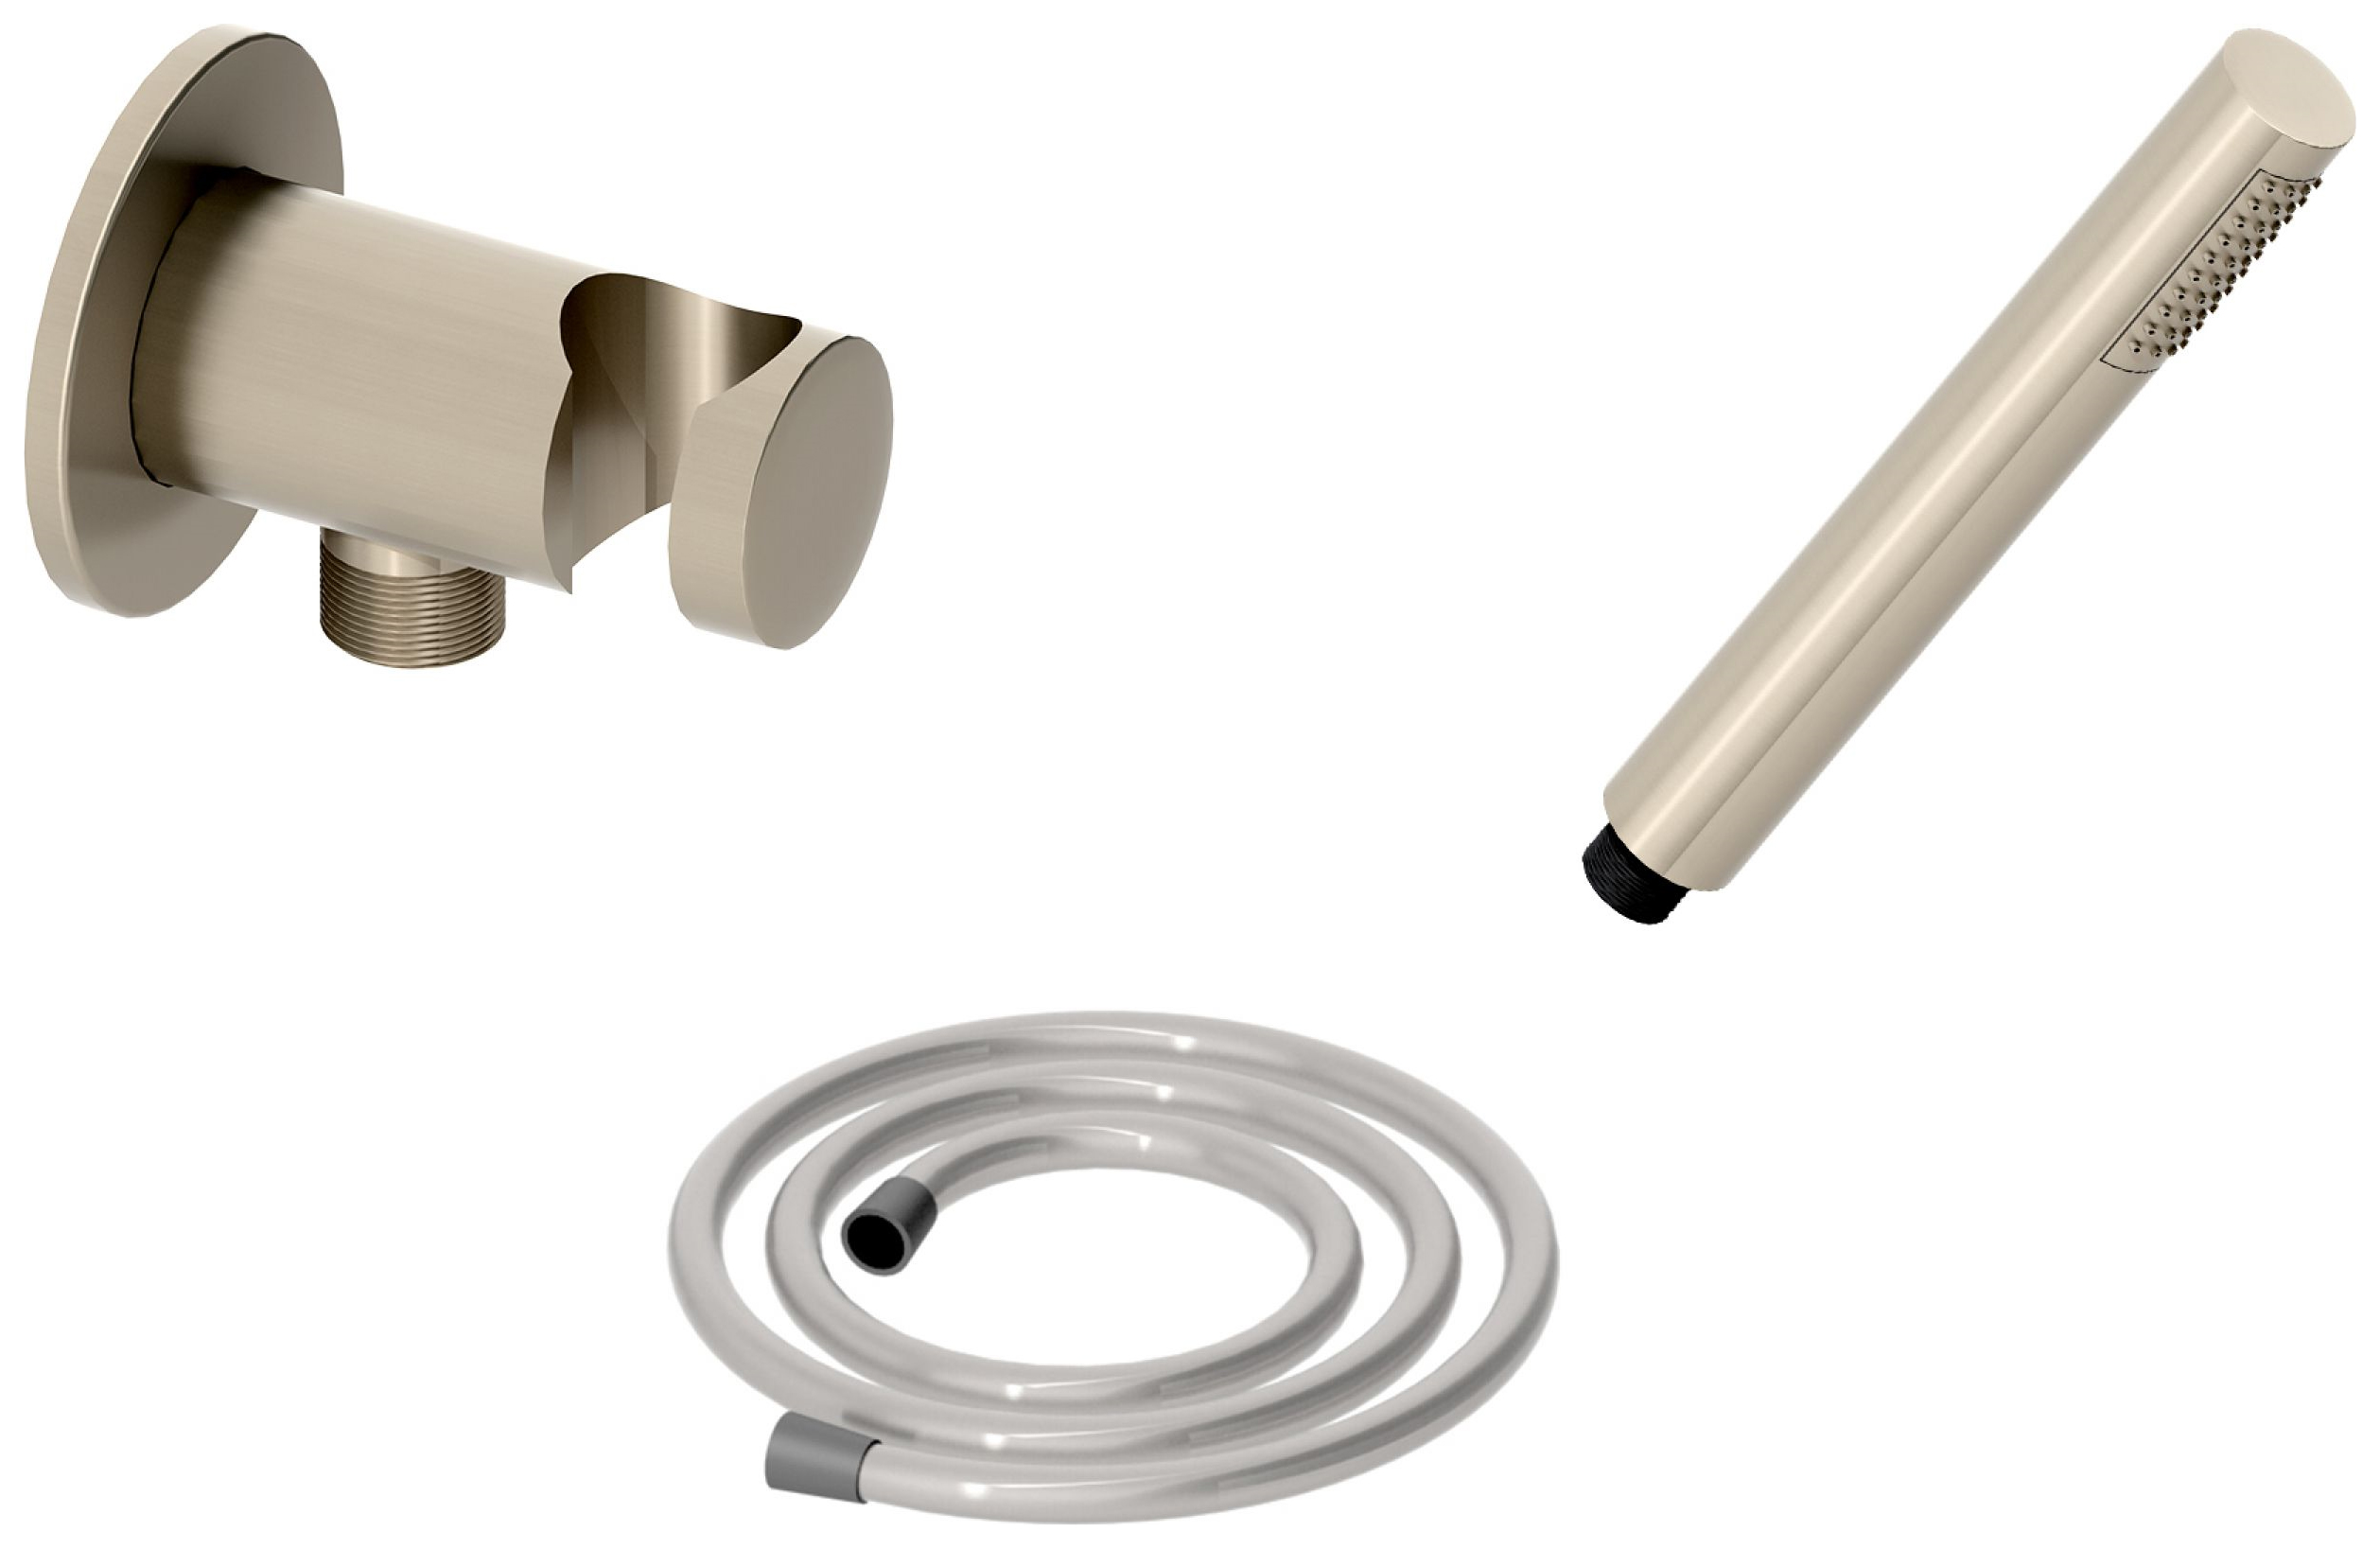 Hadleigh Shower Wall Outlet & Holder, 1.25m Hose & Handset Accessories Kit in Brushed Nickel